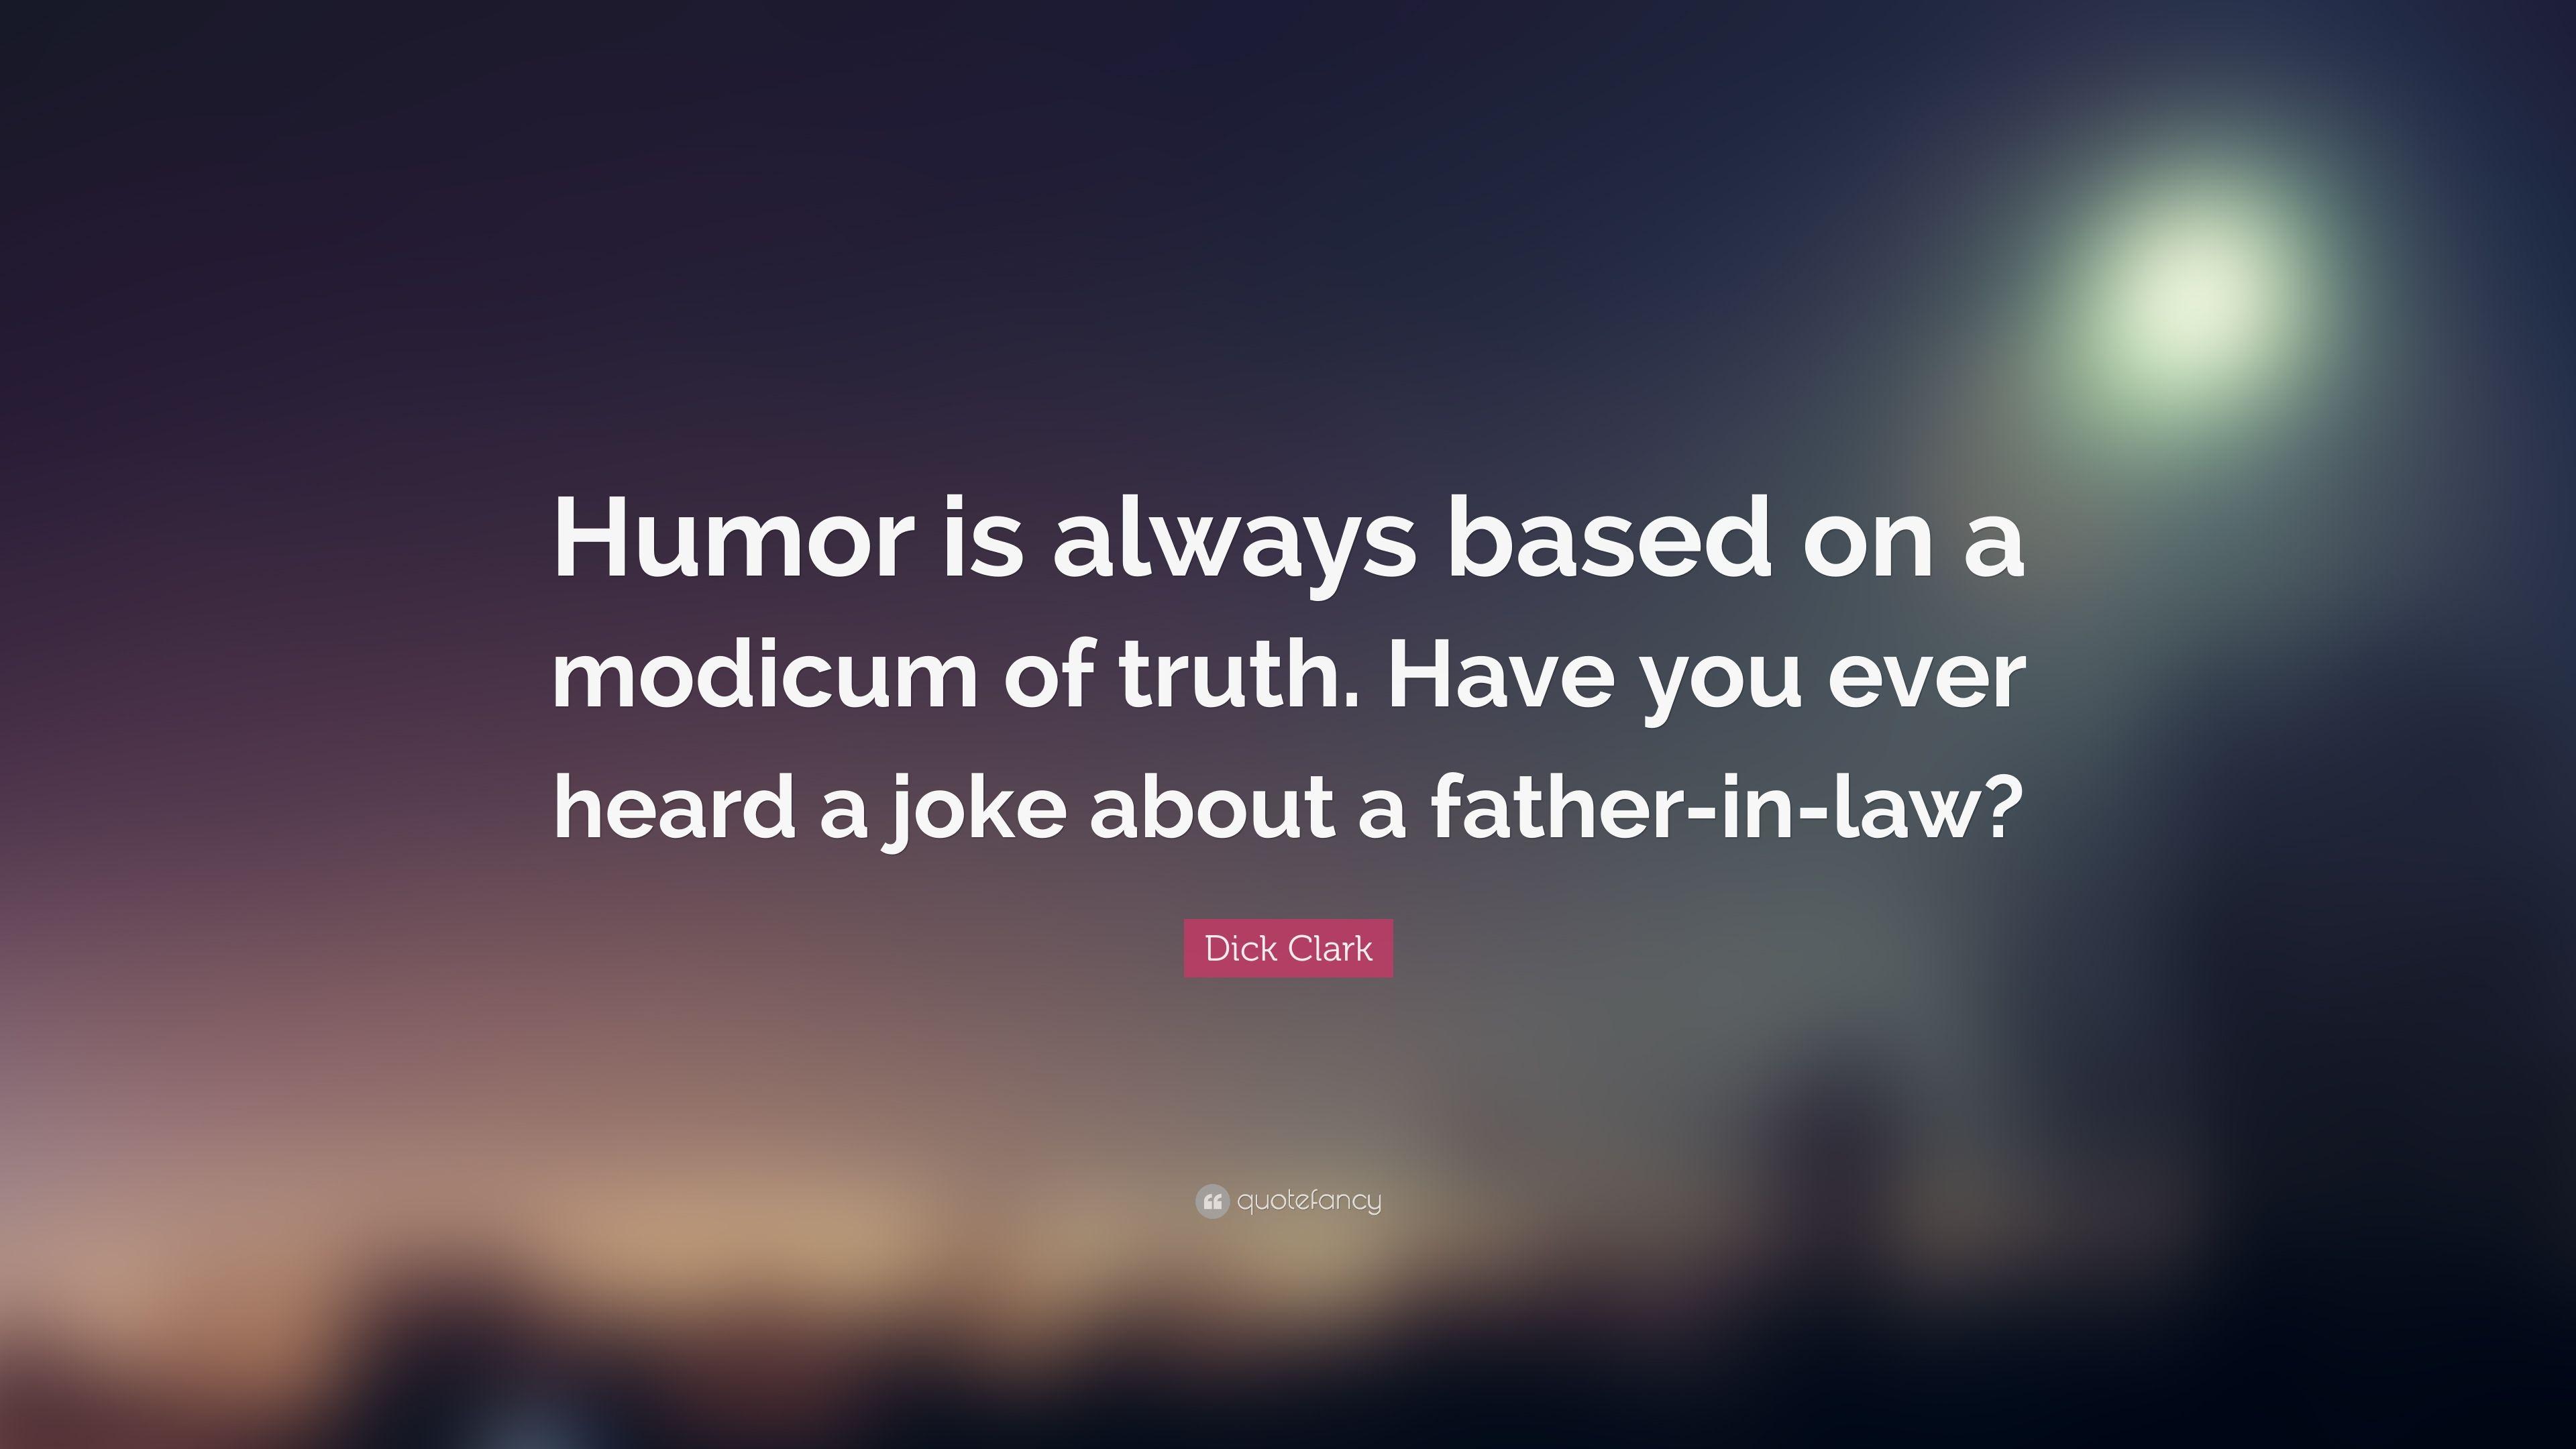 Dick Clark Quote: “Humor is always based on a modicum of truth. Have